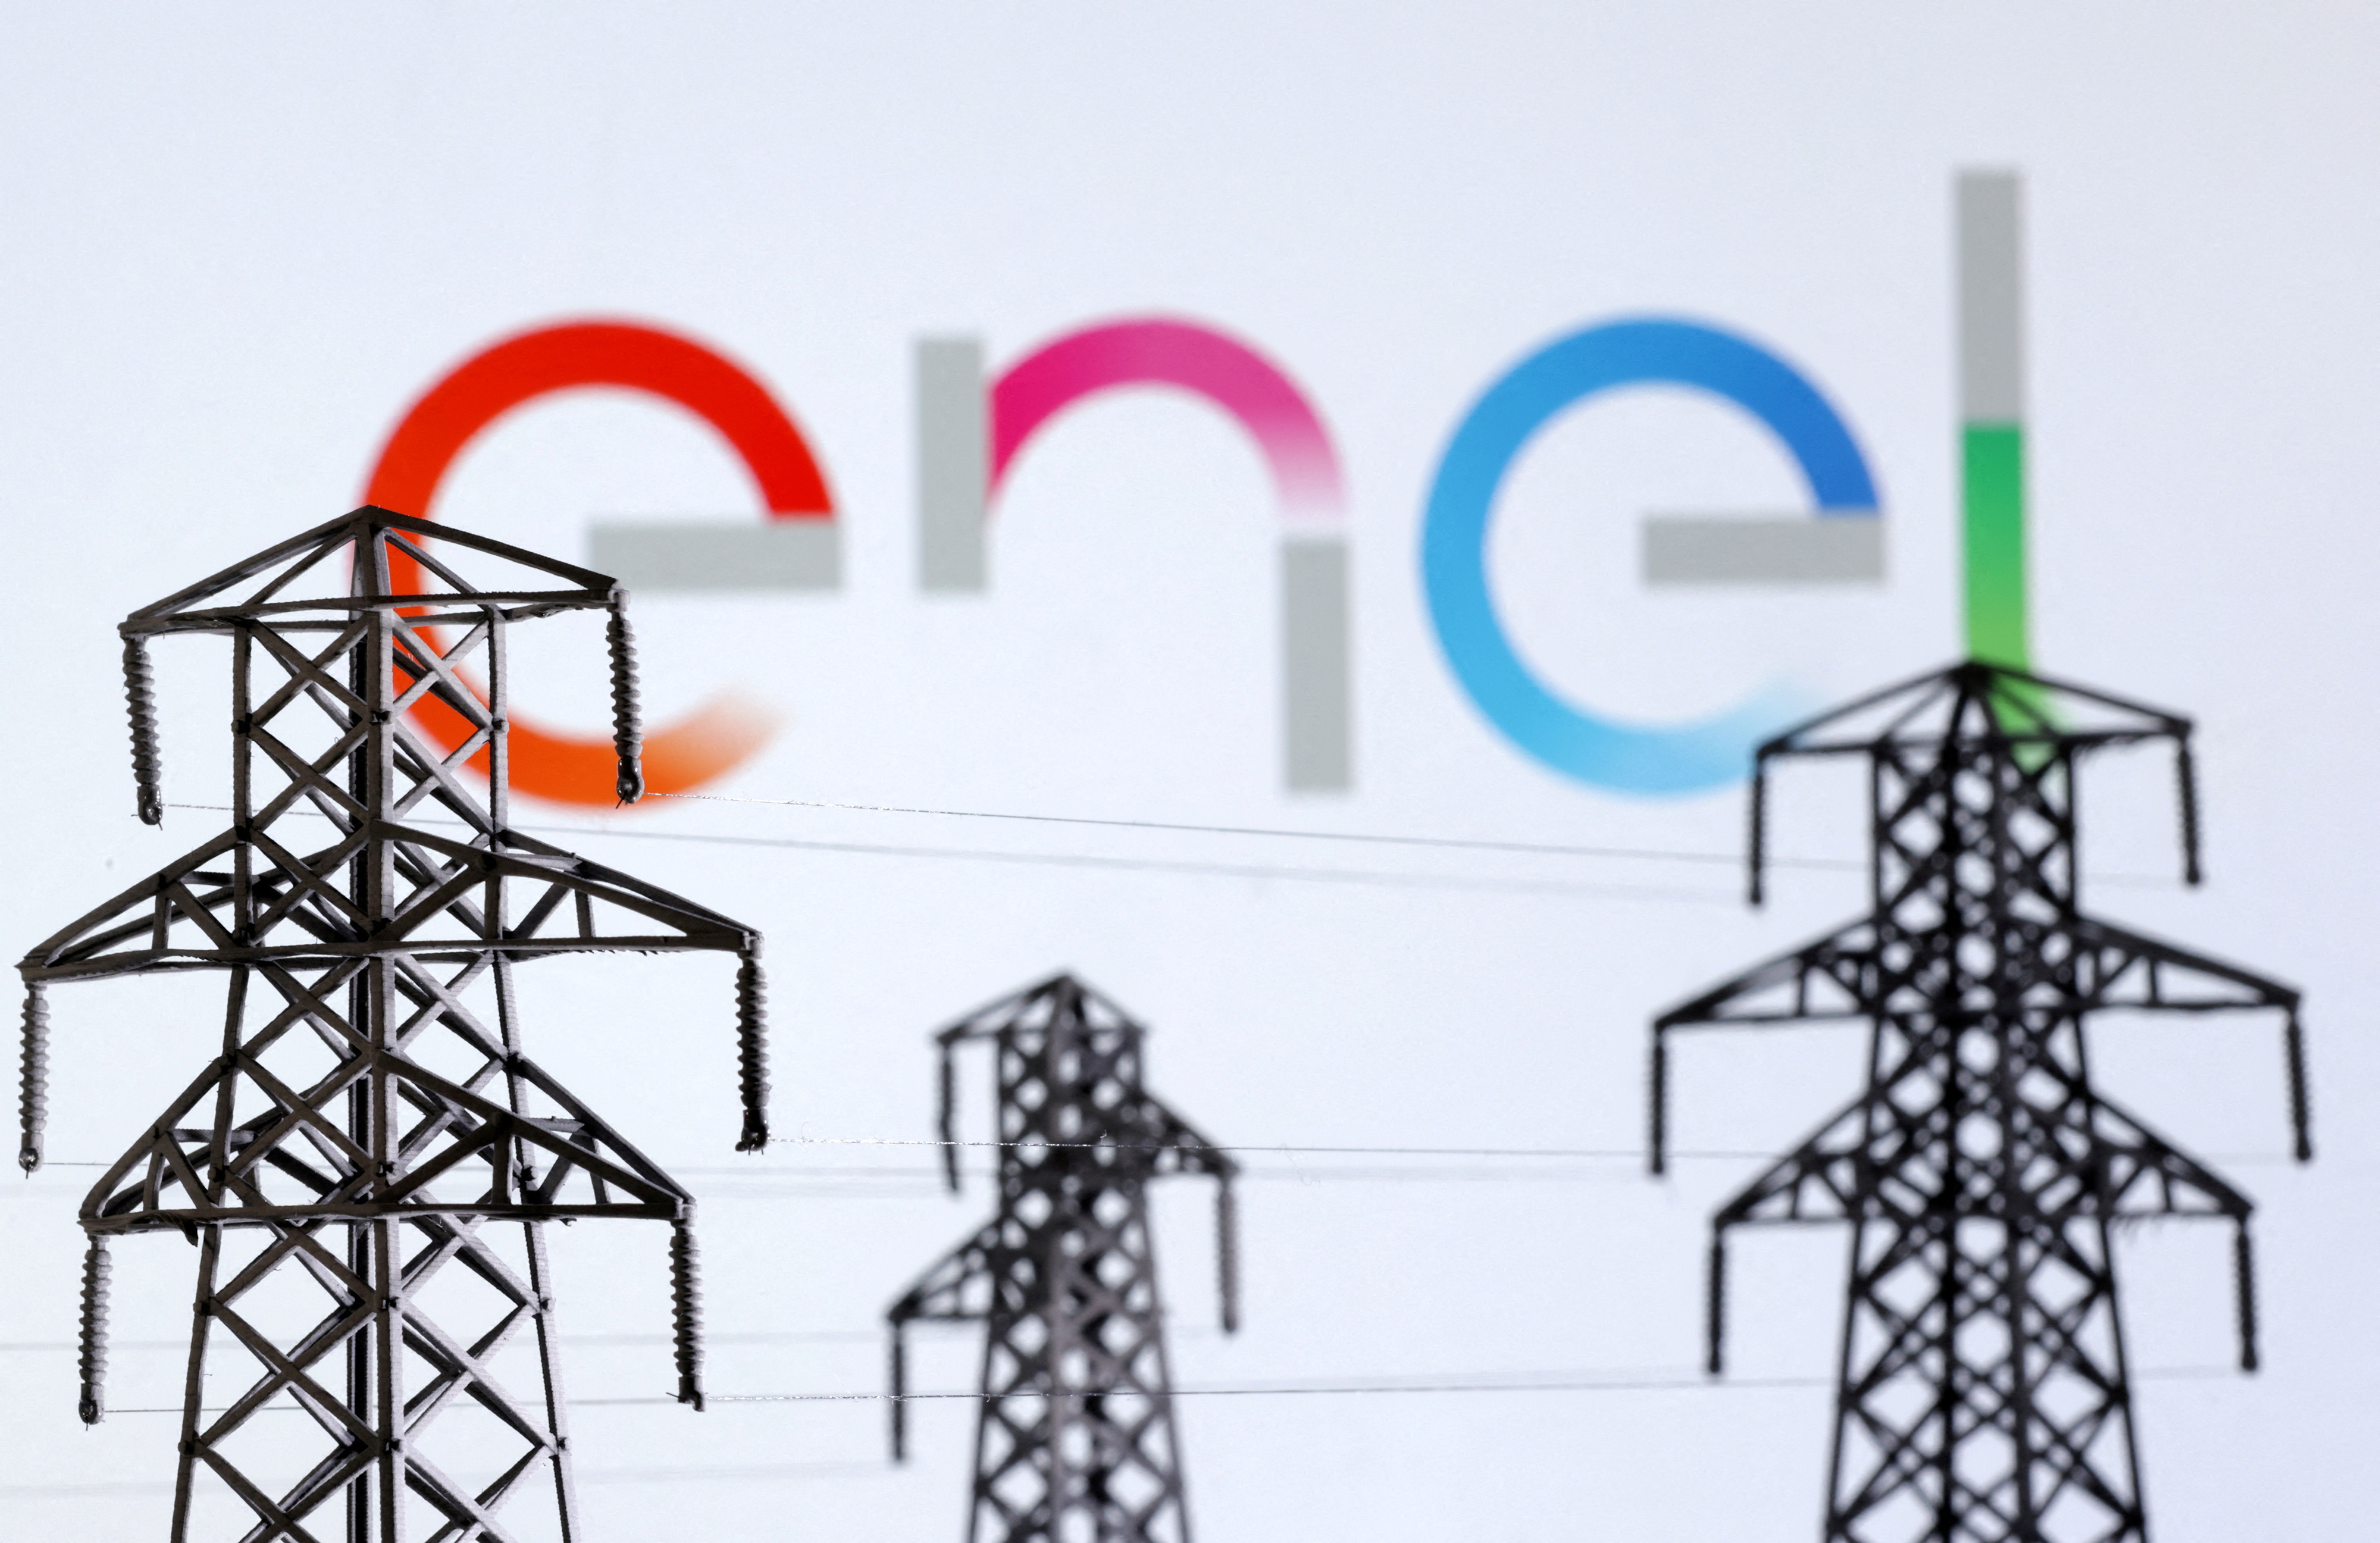 Enel's involvement in the leading sustainability organizations and networks